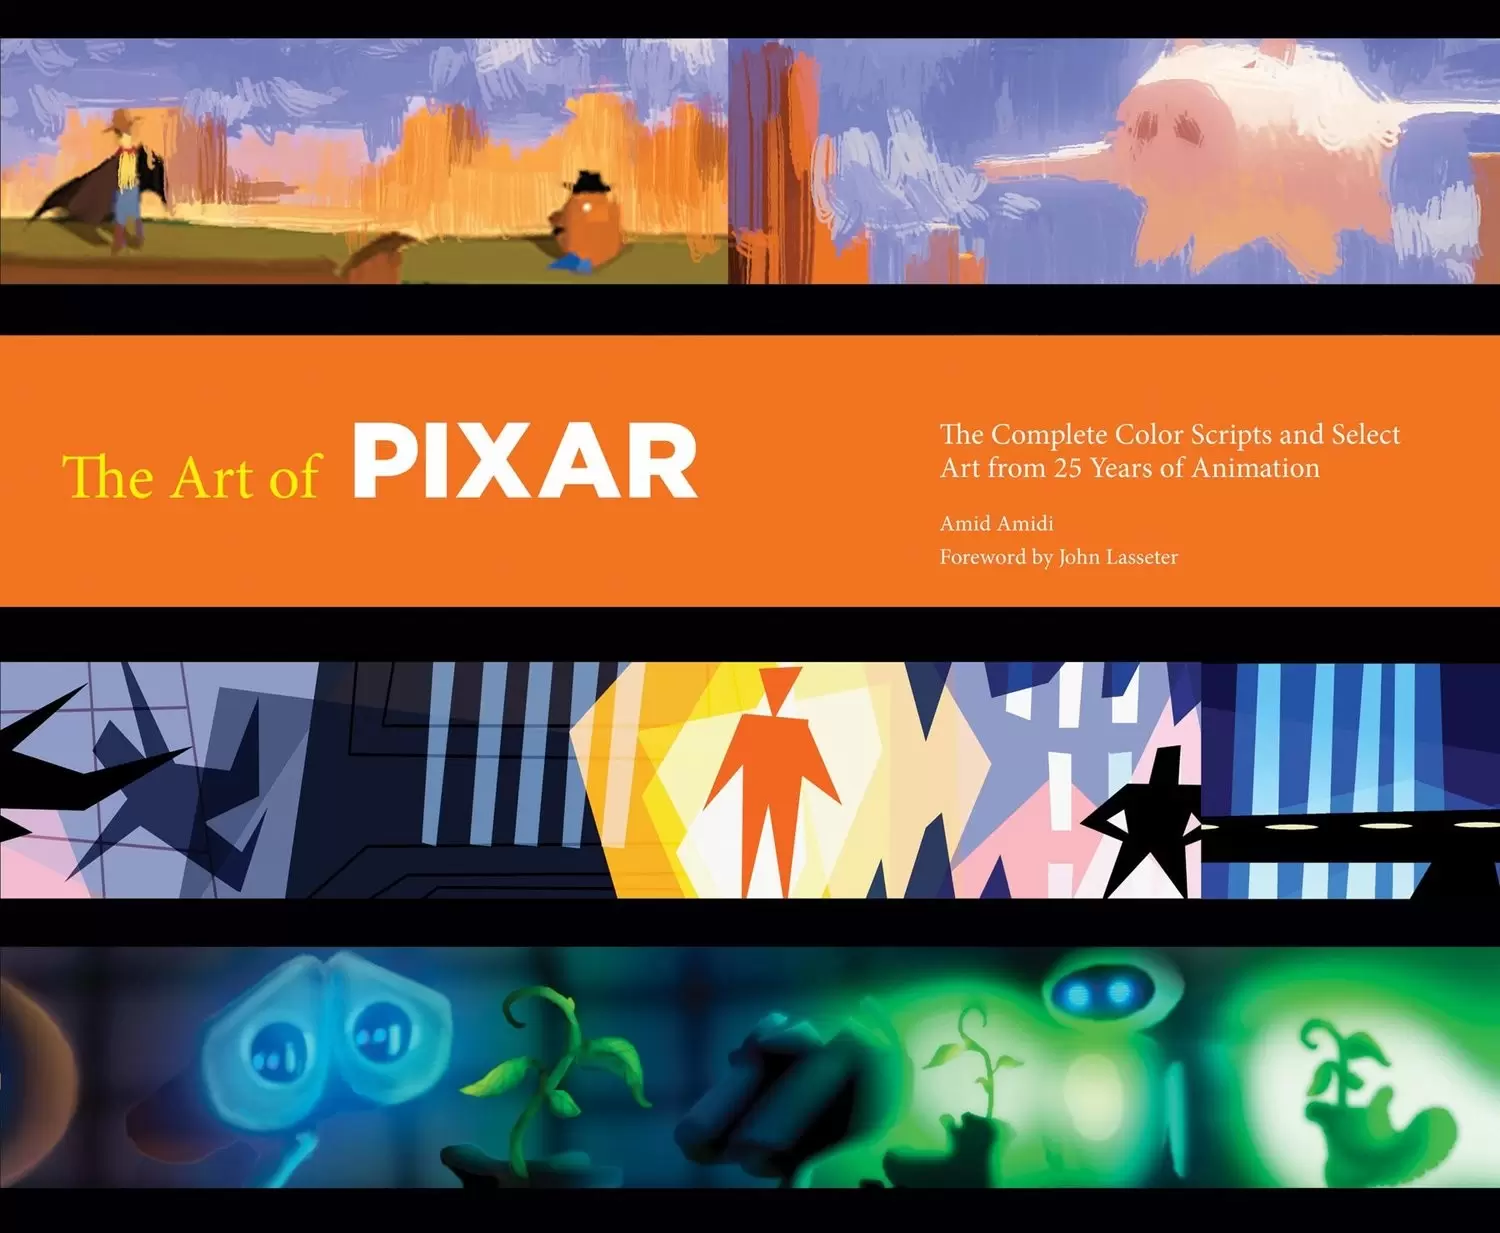 Disney - The Art of Pixar: The Complete Colorscripts and Select Art from 25 Years of Animation